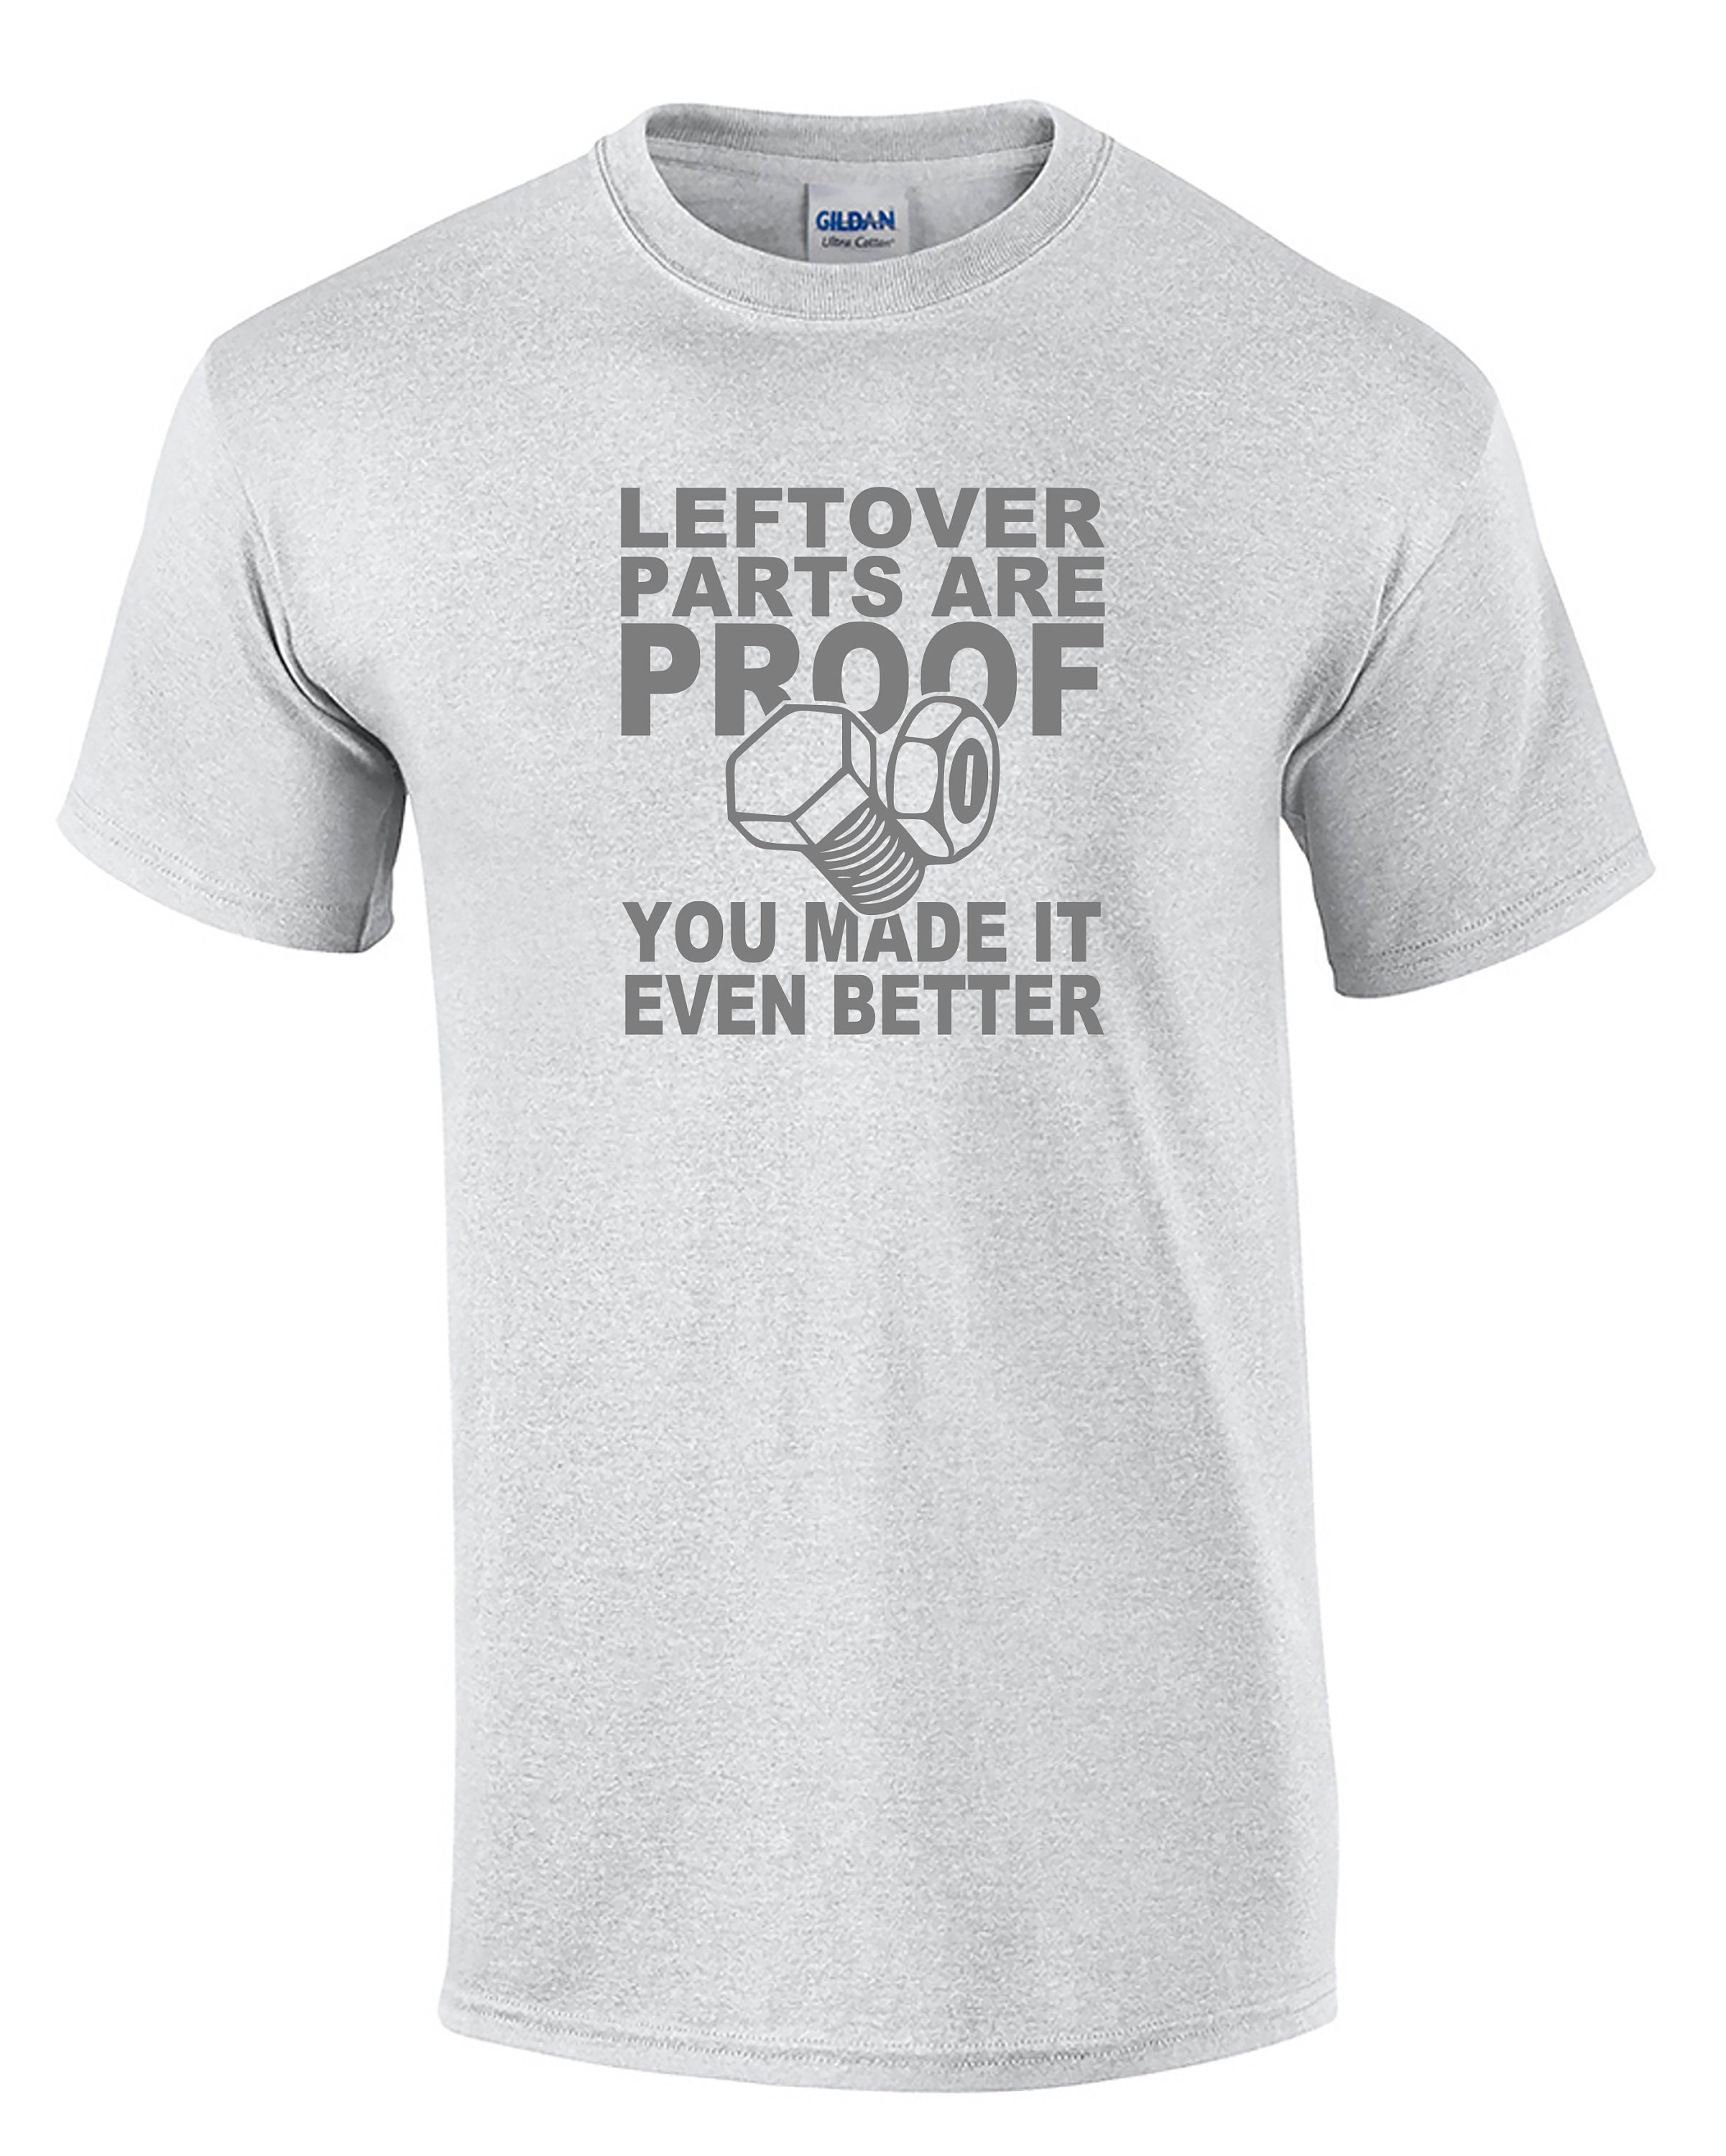 Leftover Parts are Proof You Made It Even Better (Mens T-Shirt)